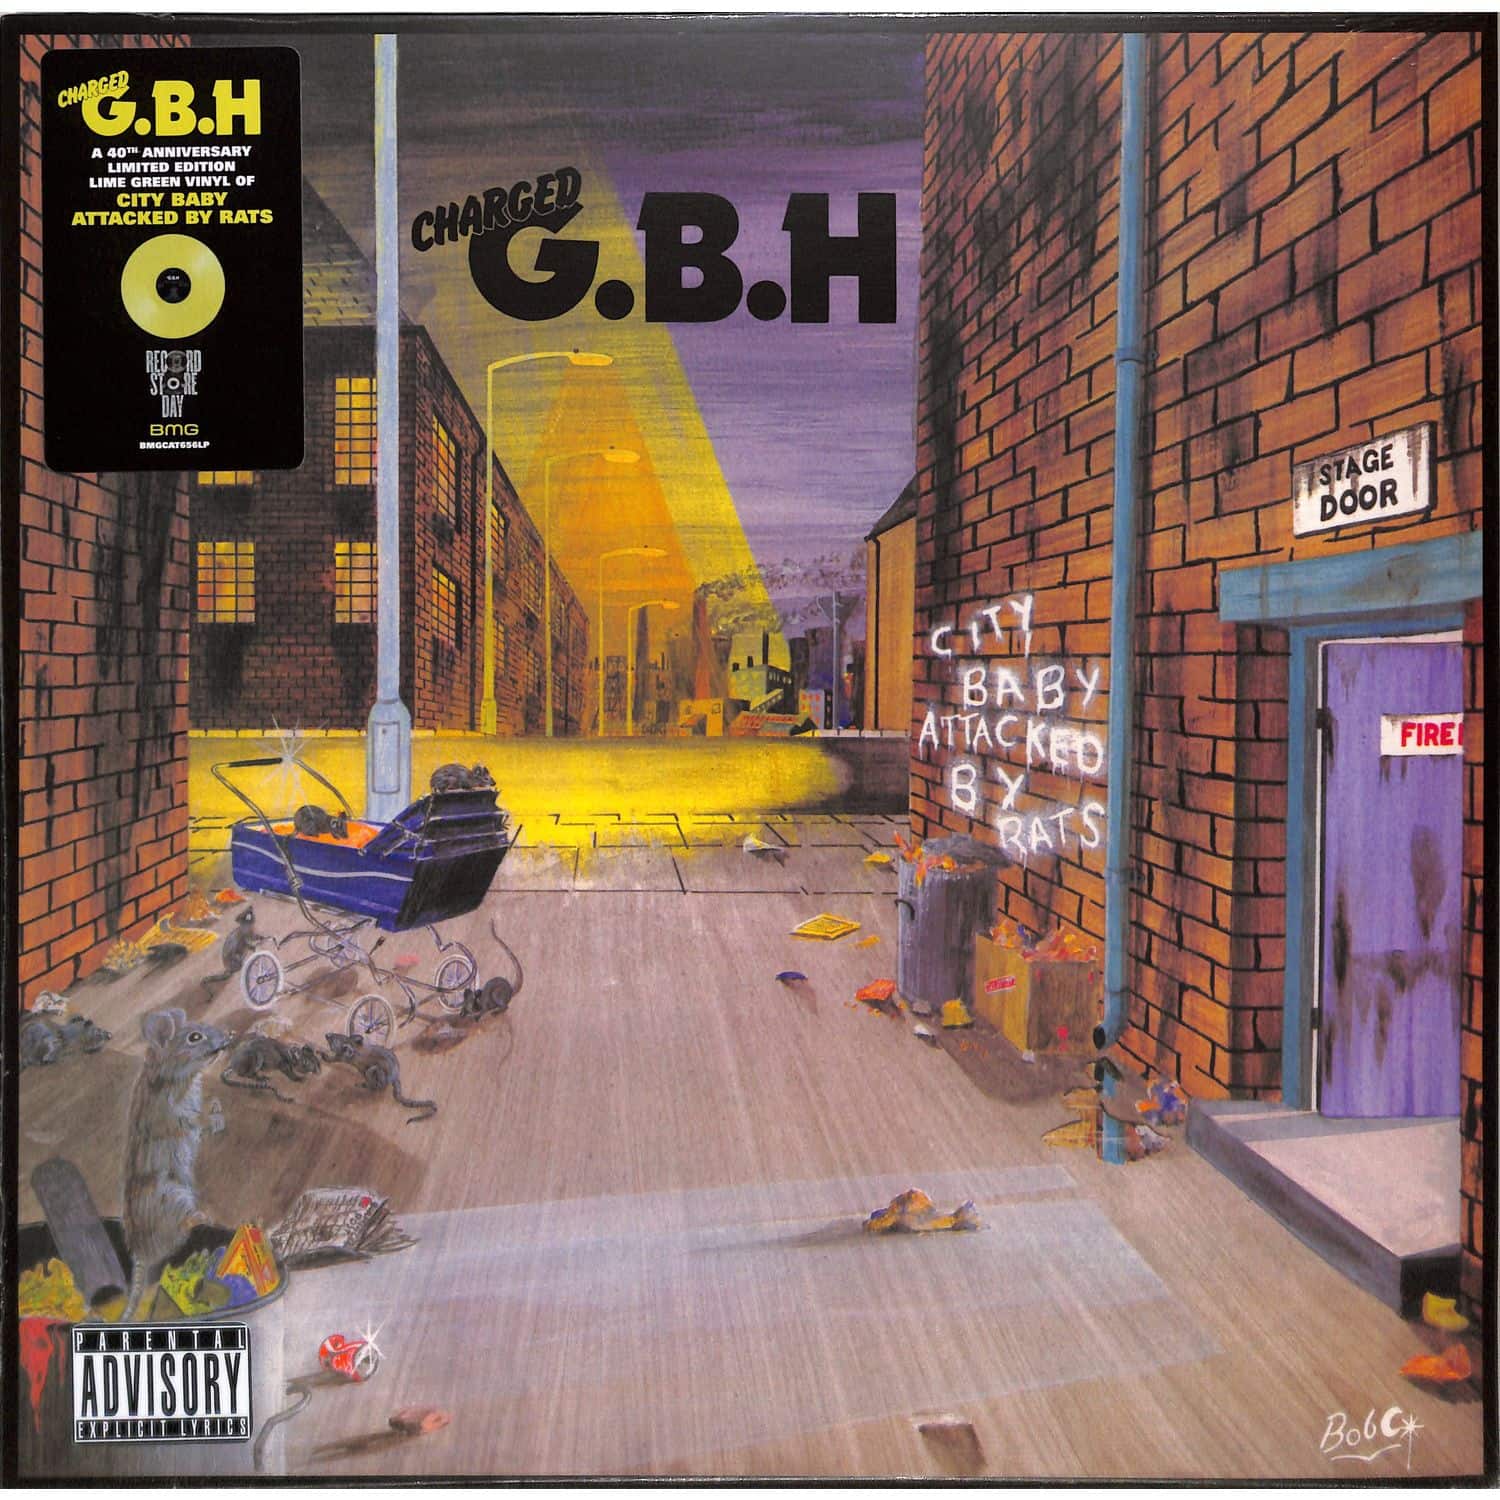 G.B.H. - CITY BABY ATTACKED BY RATS 